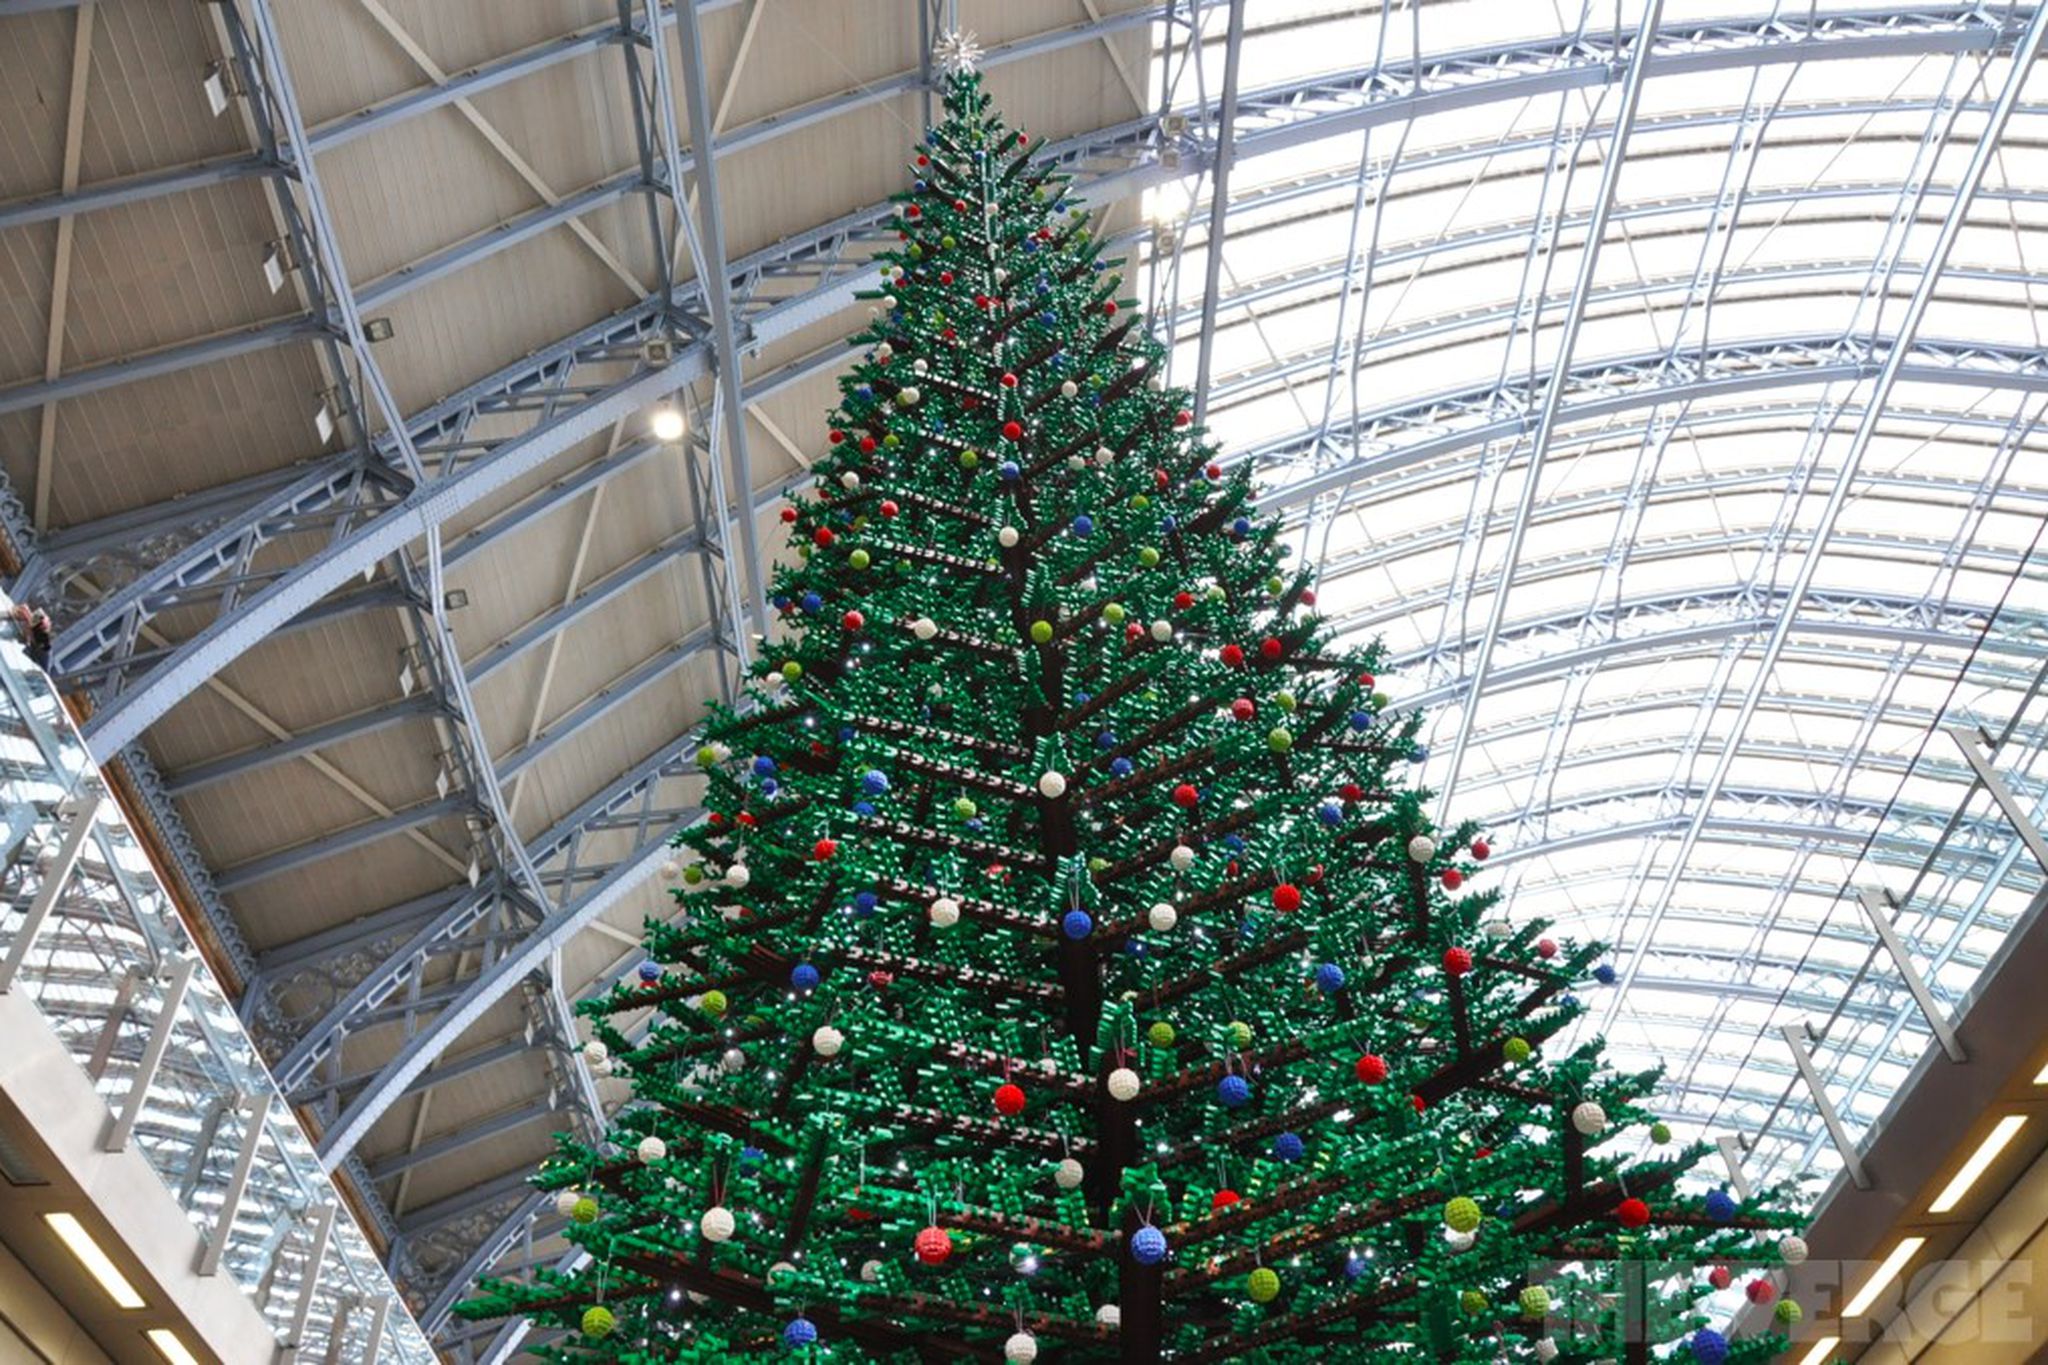 33-foot Lego Christmas tree erected in London's St Pancras Station ...